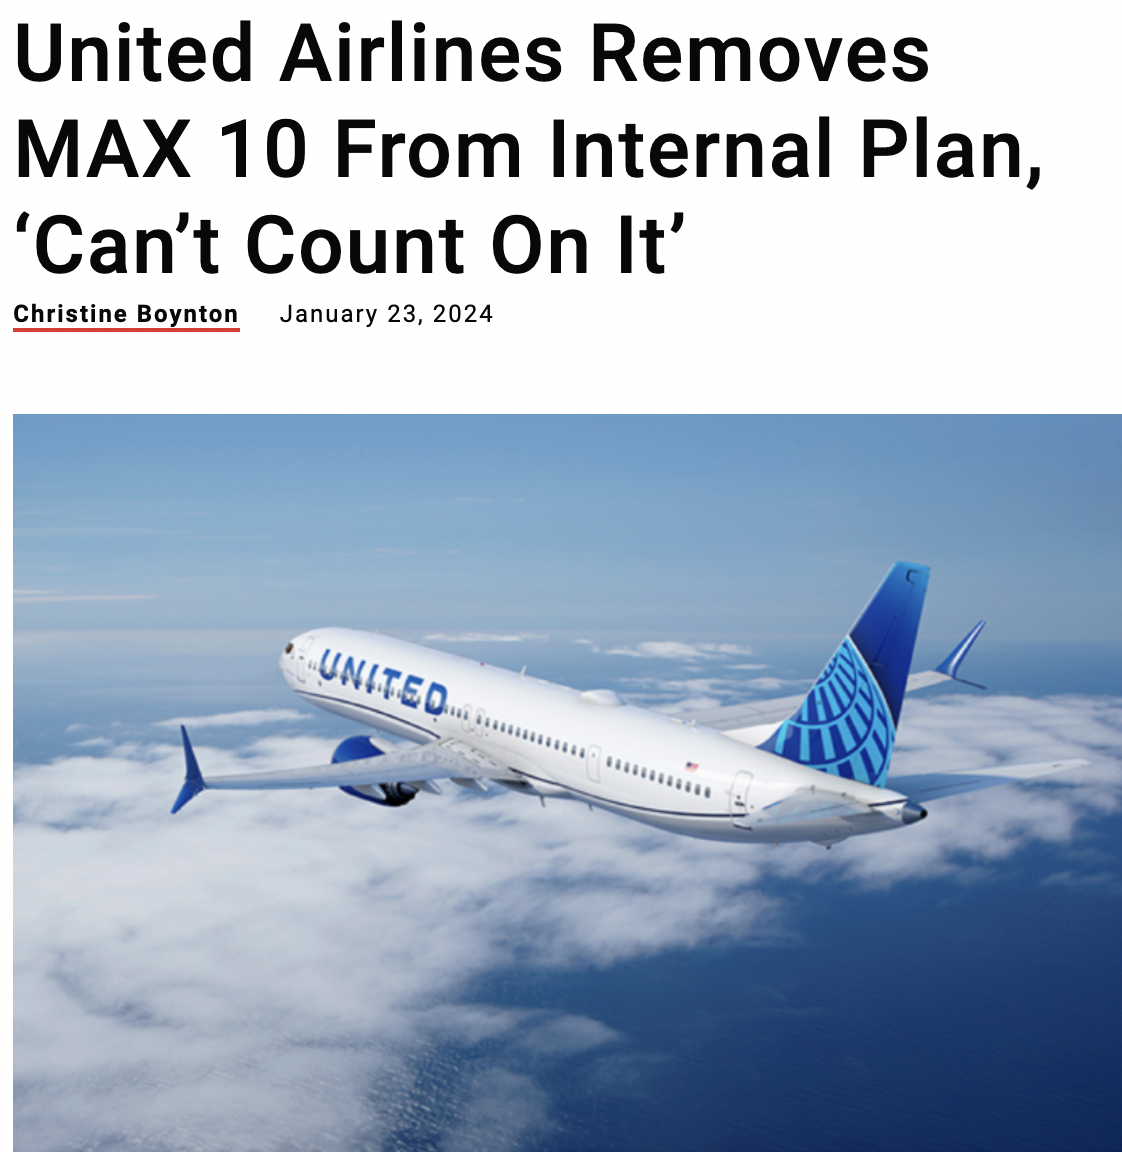 united airlines boeing 737 max 10 - United Airlines Removes Max 10 From Internal Plan, 'Can't Count On It' Christine Boynton United www.